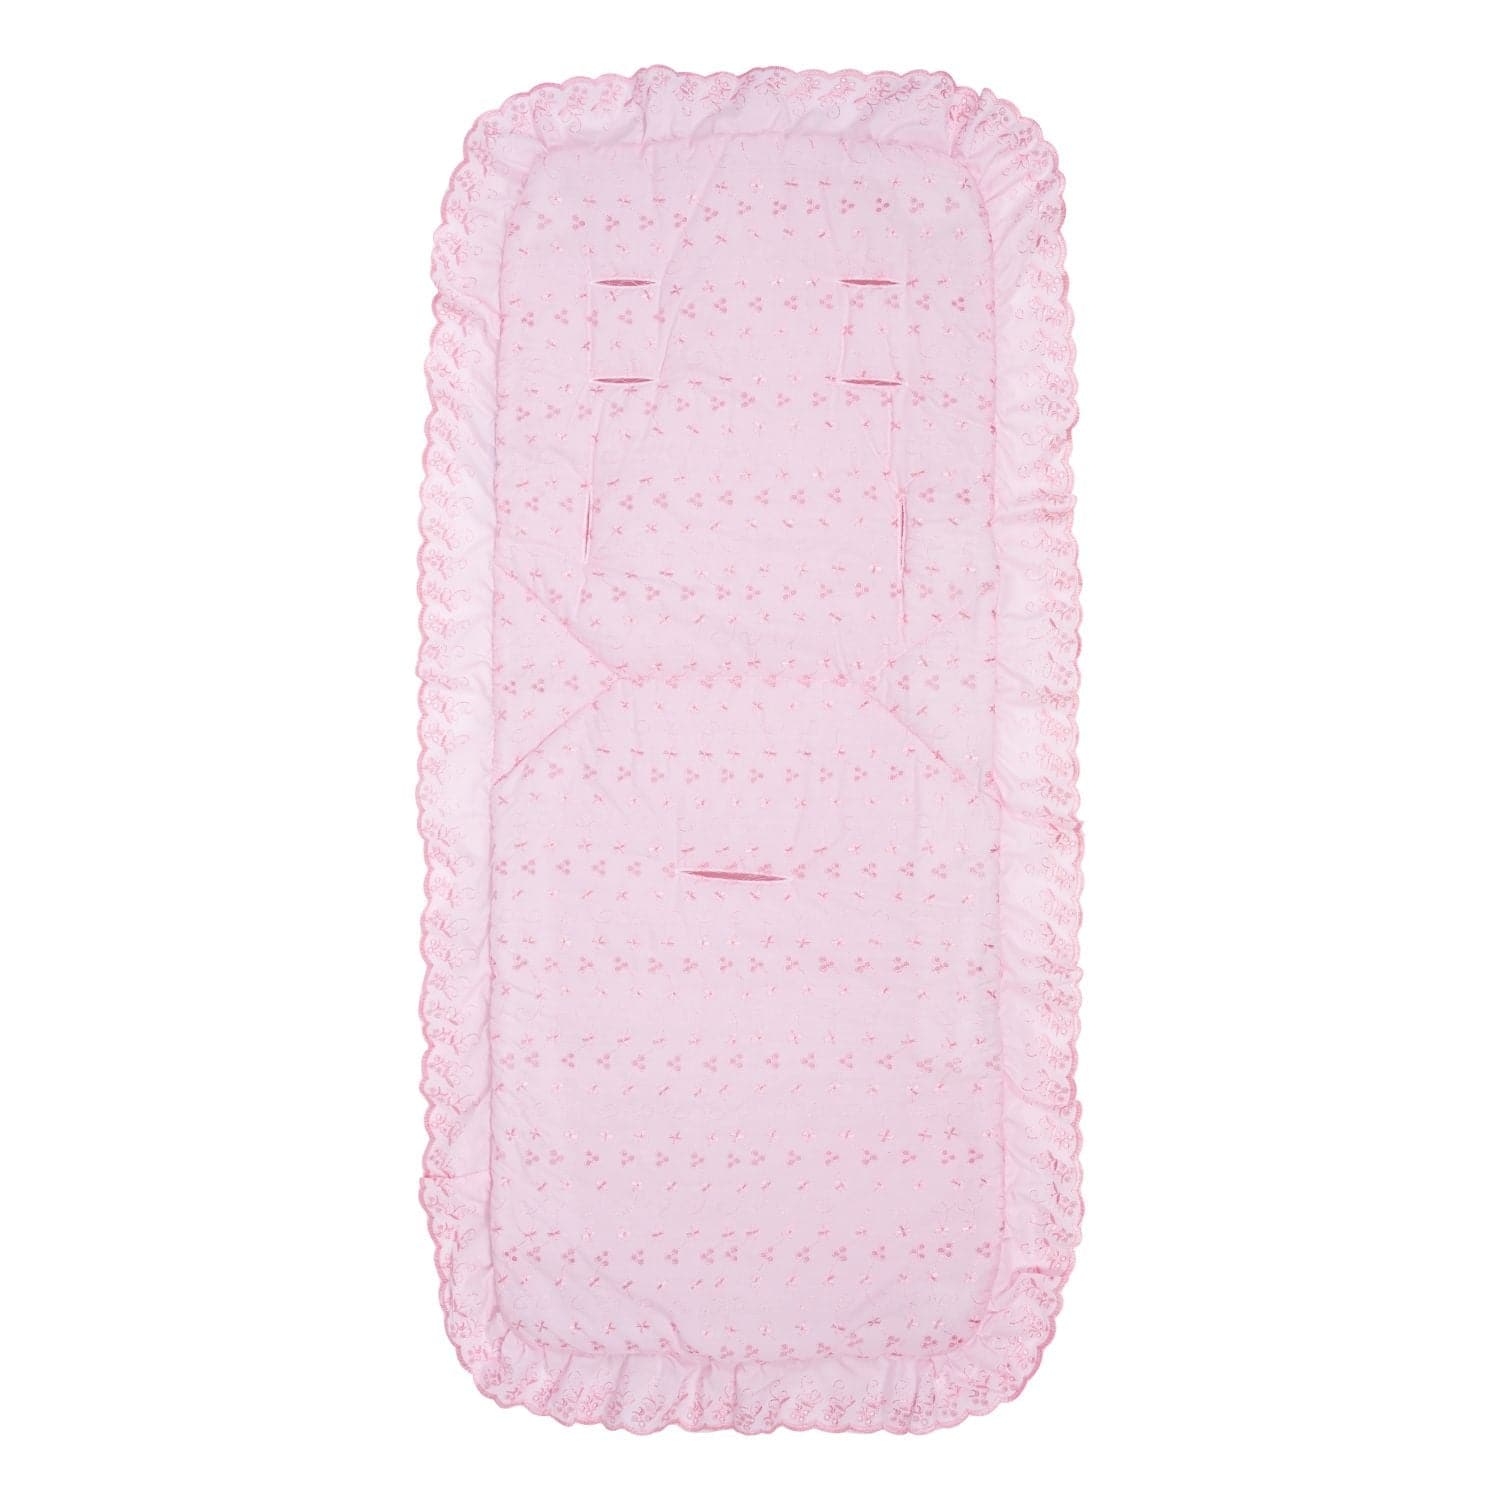 Broderie Anglaise Pushchair Seat Liner Compatible with Babylo - Fits All Models - For Your Little One